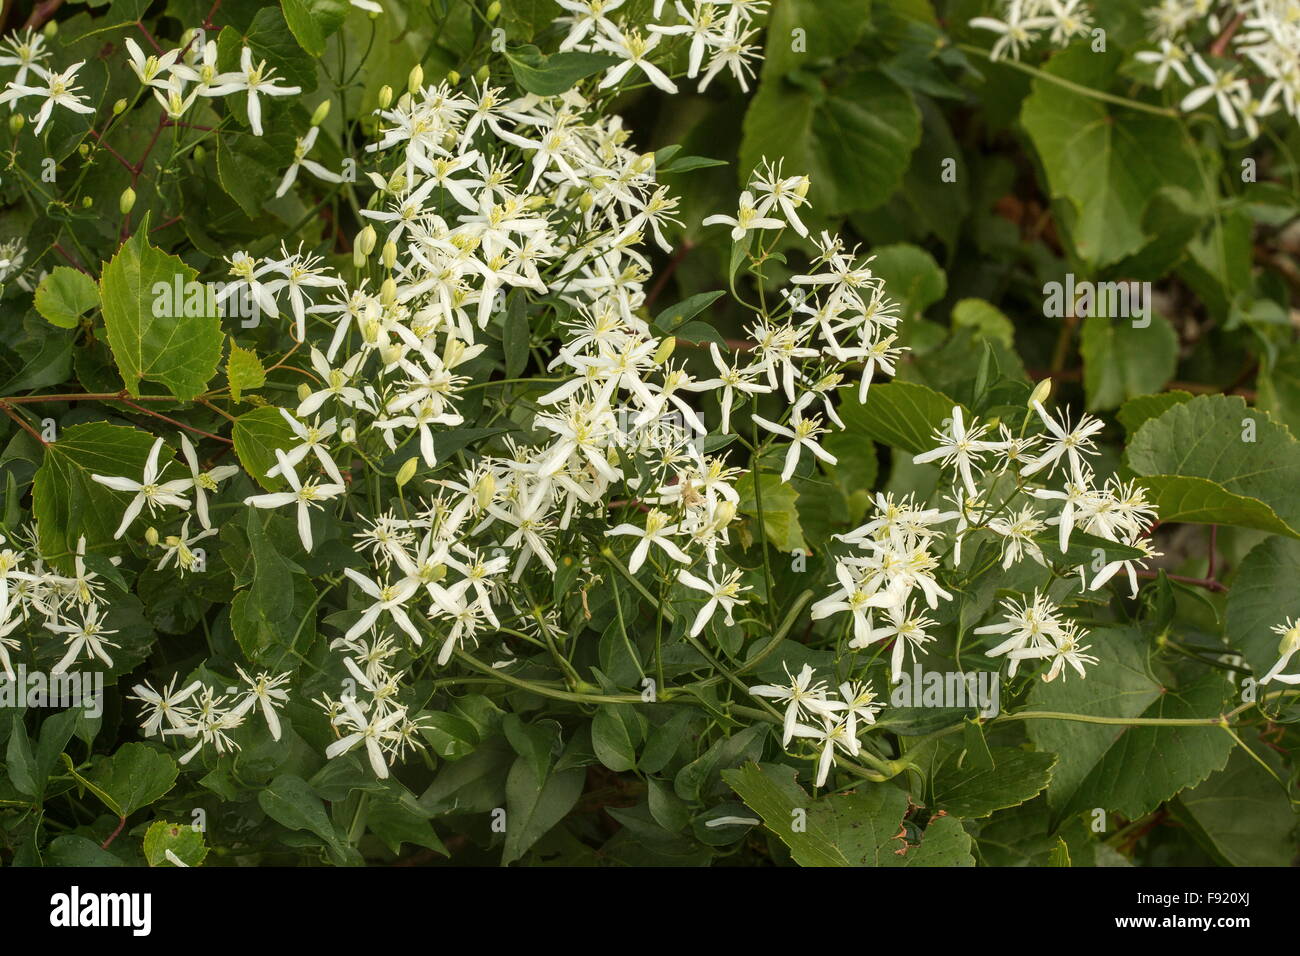 Sweet-scented virgin's bower, Clematis flammula, in flower in garrigue, south France. Stock Photo